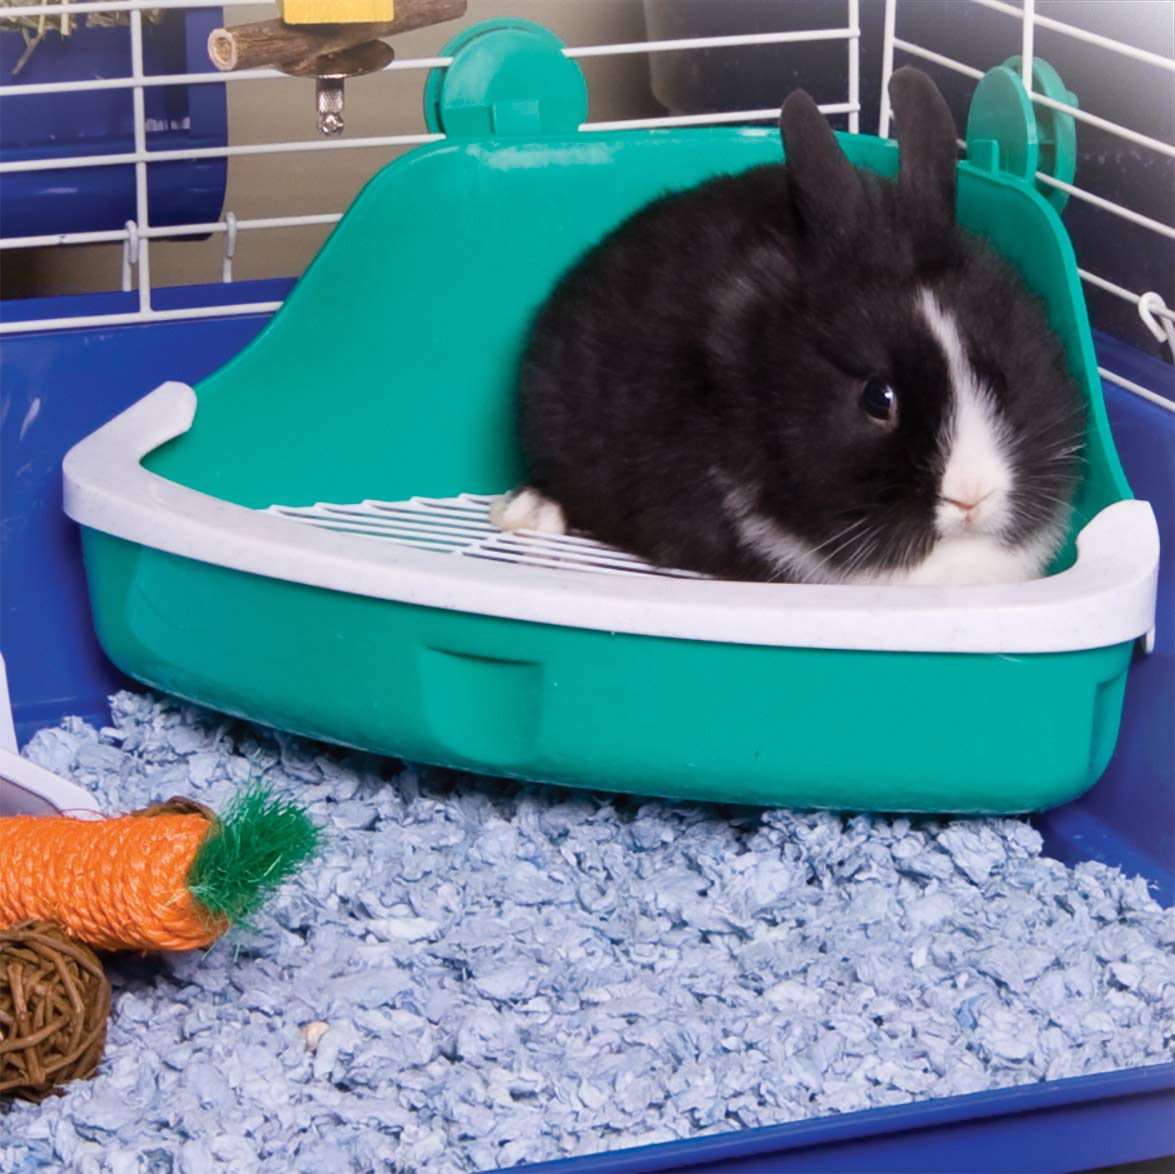 Ware 2 Pack of Corner Litter Pans for Hamsters Gerbils and Dwarf Hamsters, As...